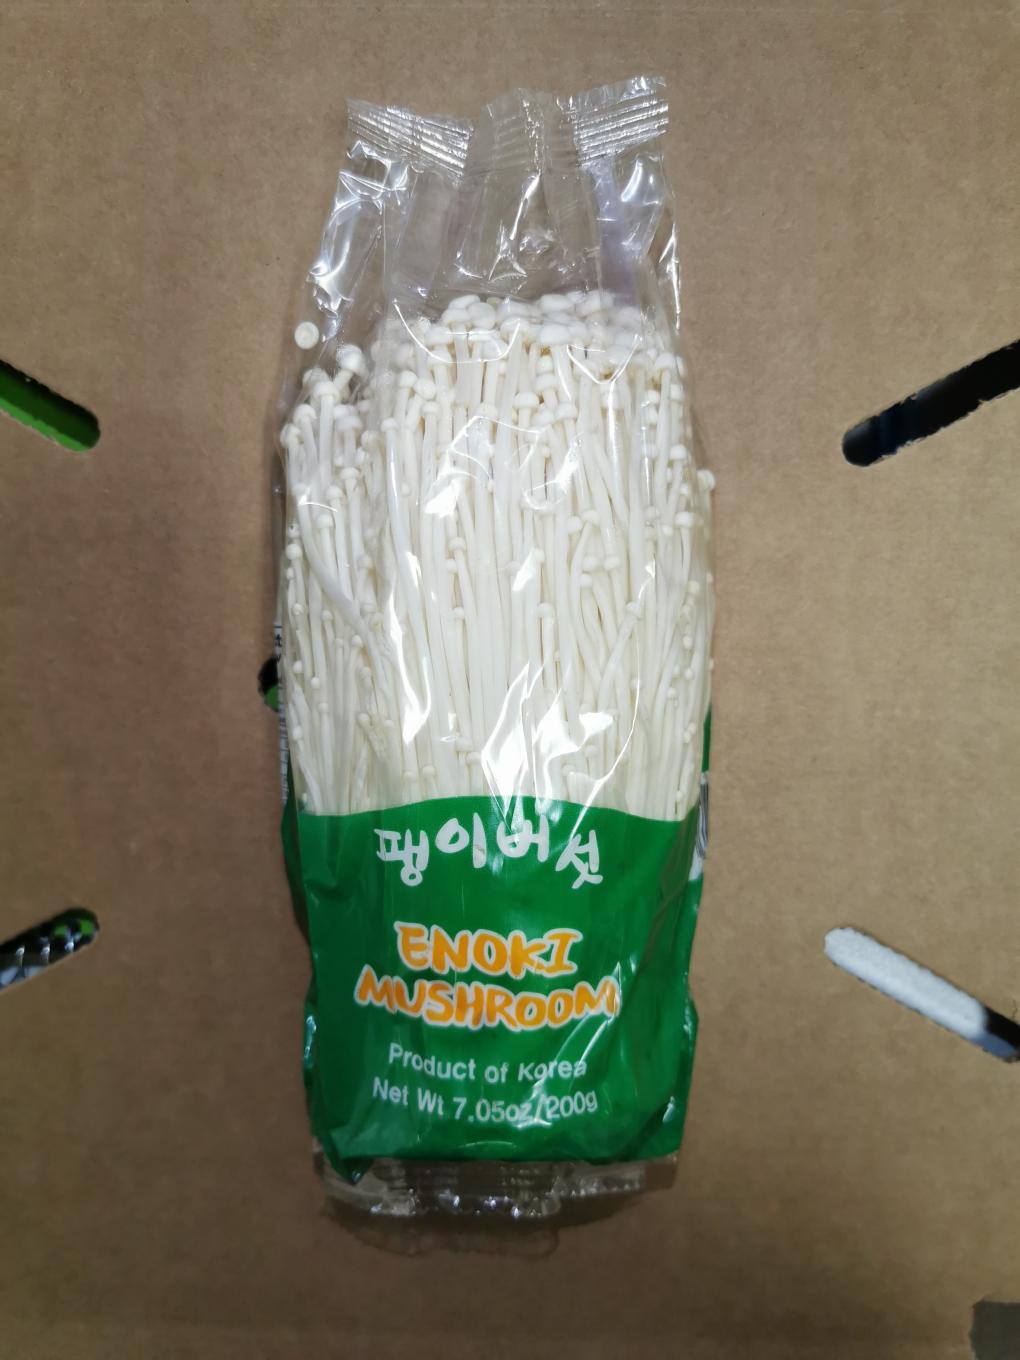 Listeria Infections Linked to Enoki Mushrooms has sickened 36, 4 deaths and two fetal losses